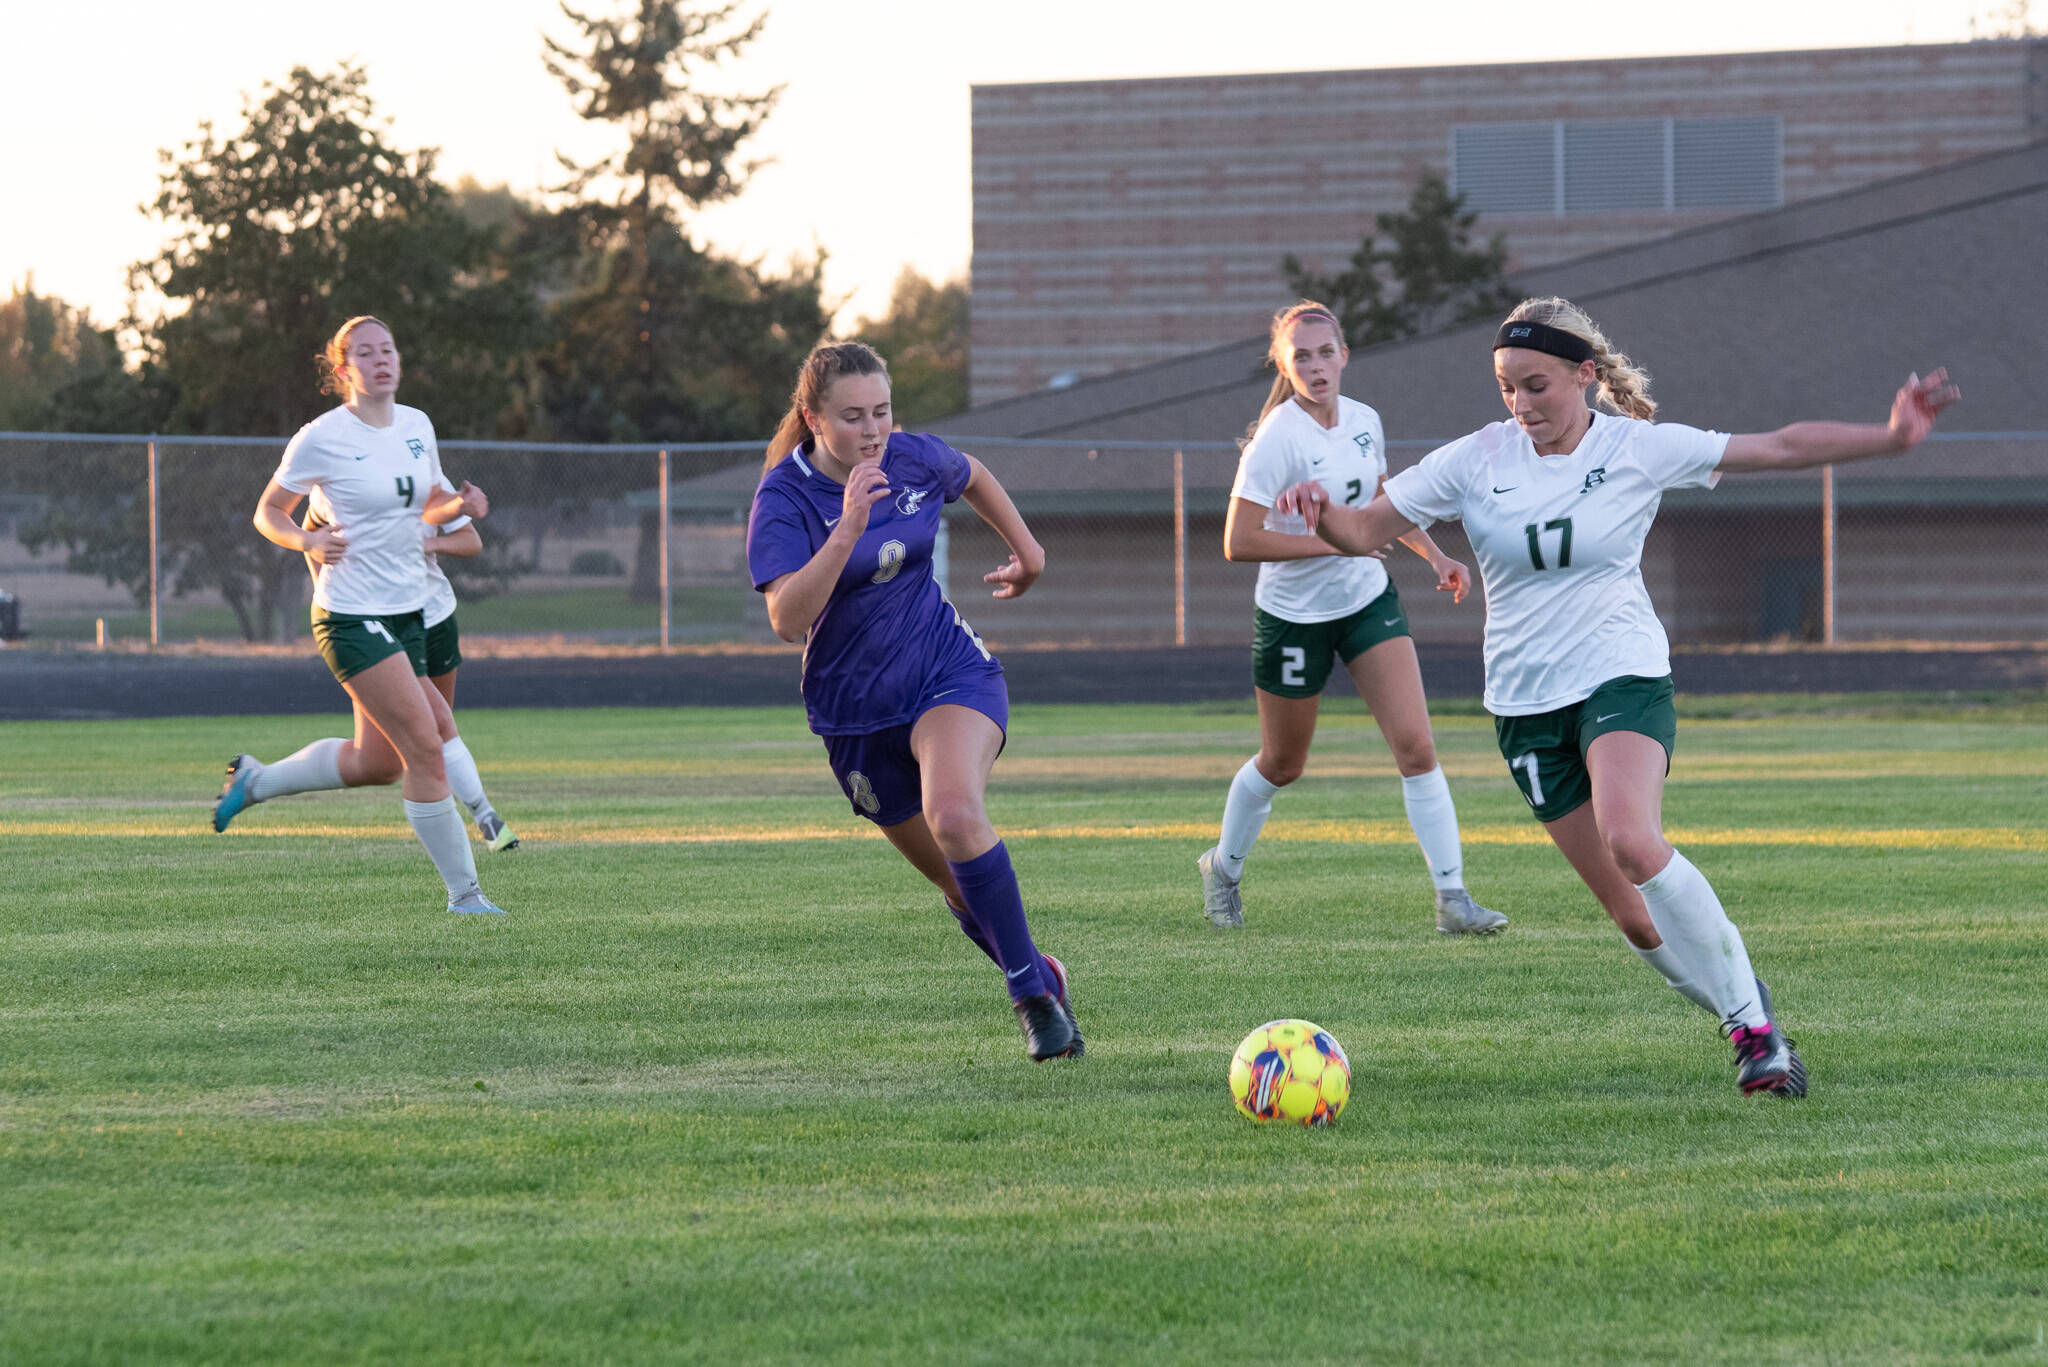 Port Angeles’ Ava-Anne Sheahan dribbles upfield while Sequim’s Nikoline Updike gives chase during the Wolves’ 2-1 Rainshadow Rumble rivalry win Thursday in Sequim.